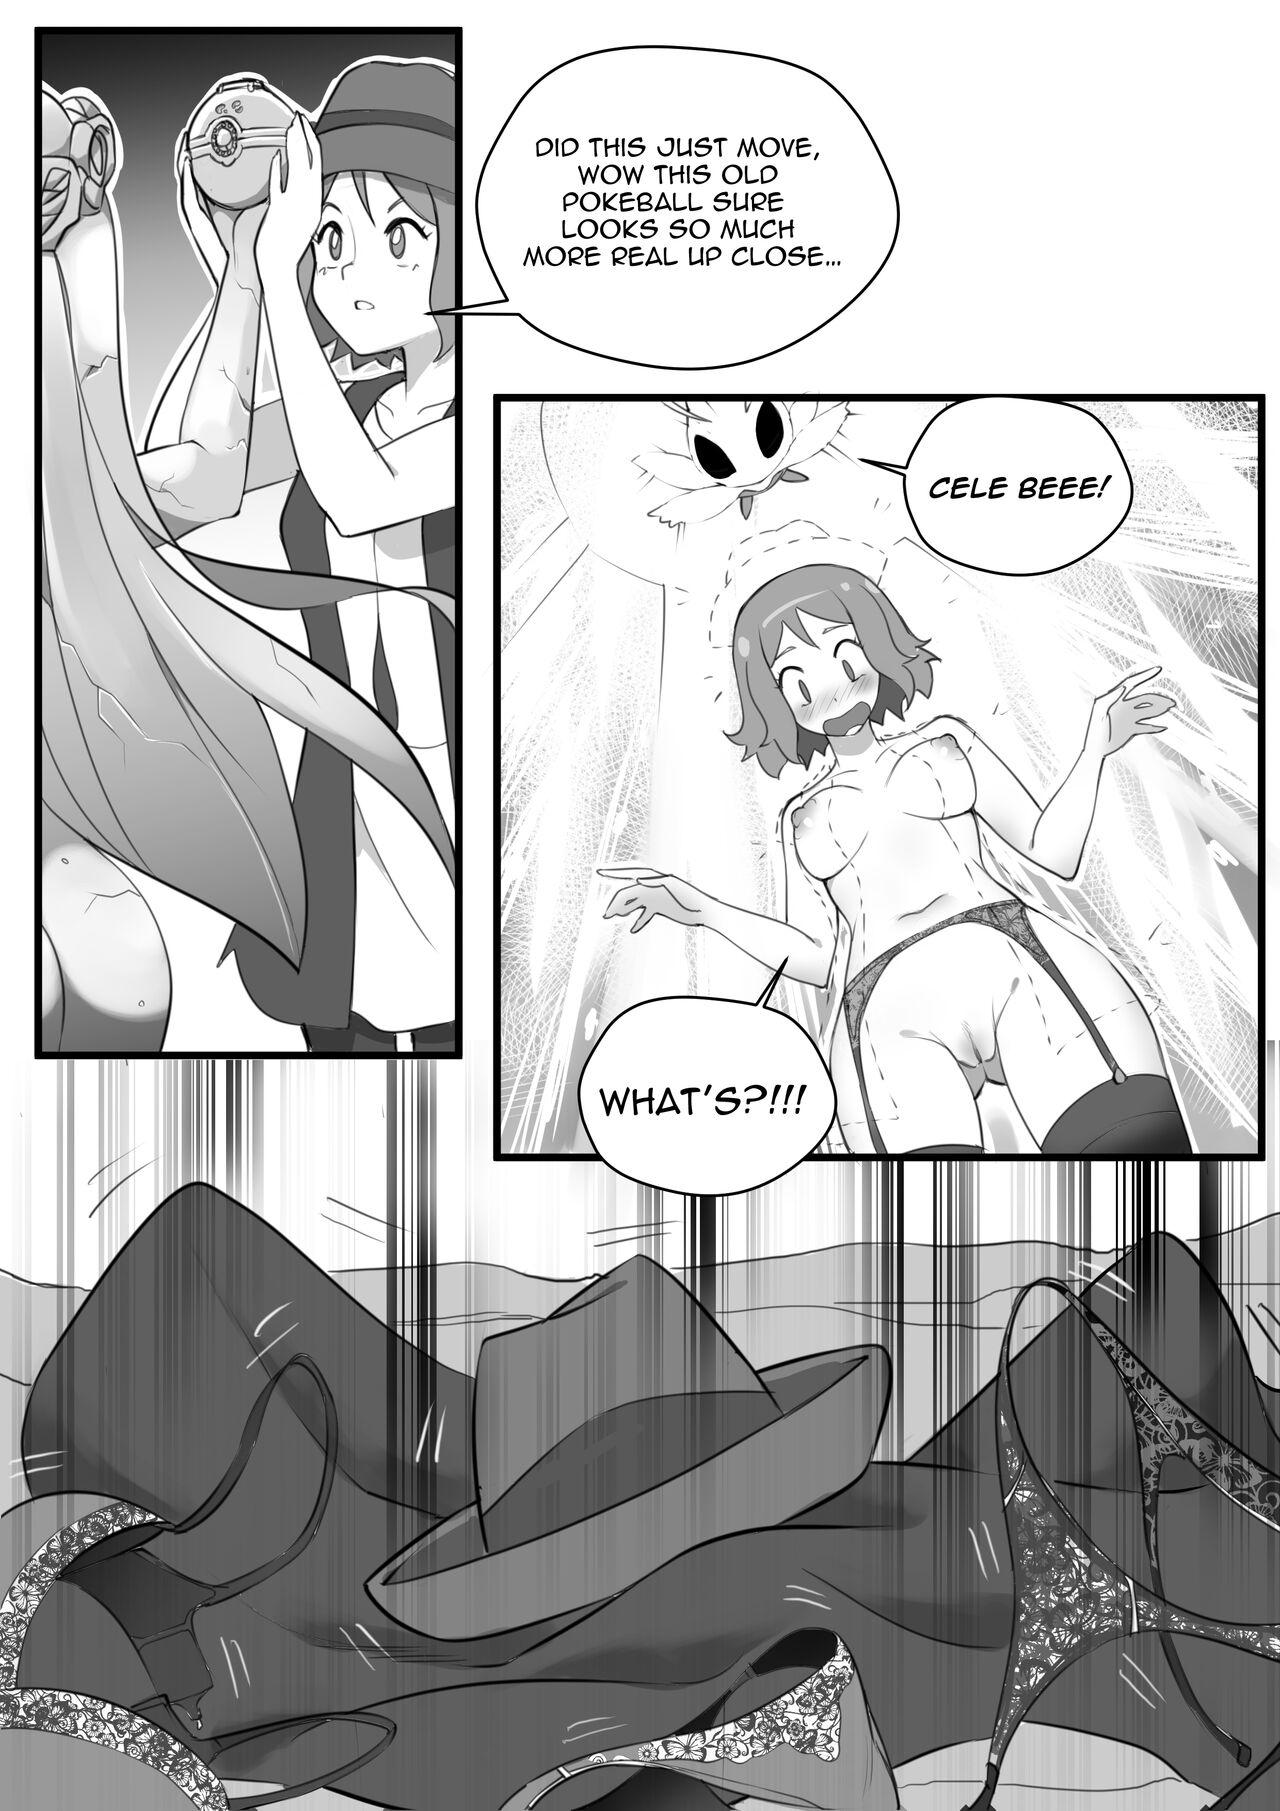 Office Serena: A Petrified Sacrifice though time! - Pokemon | pocket monsters Daddy - Page 2